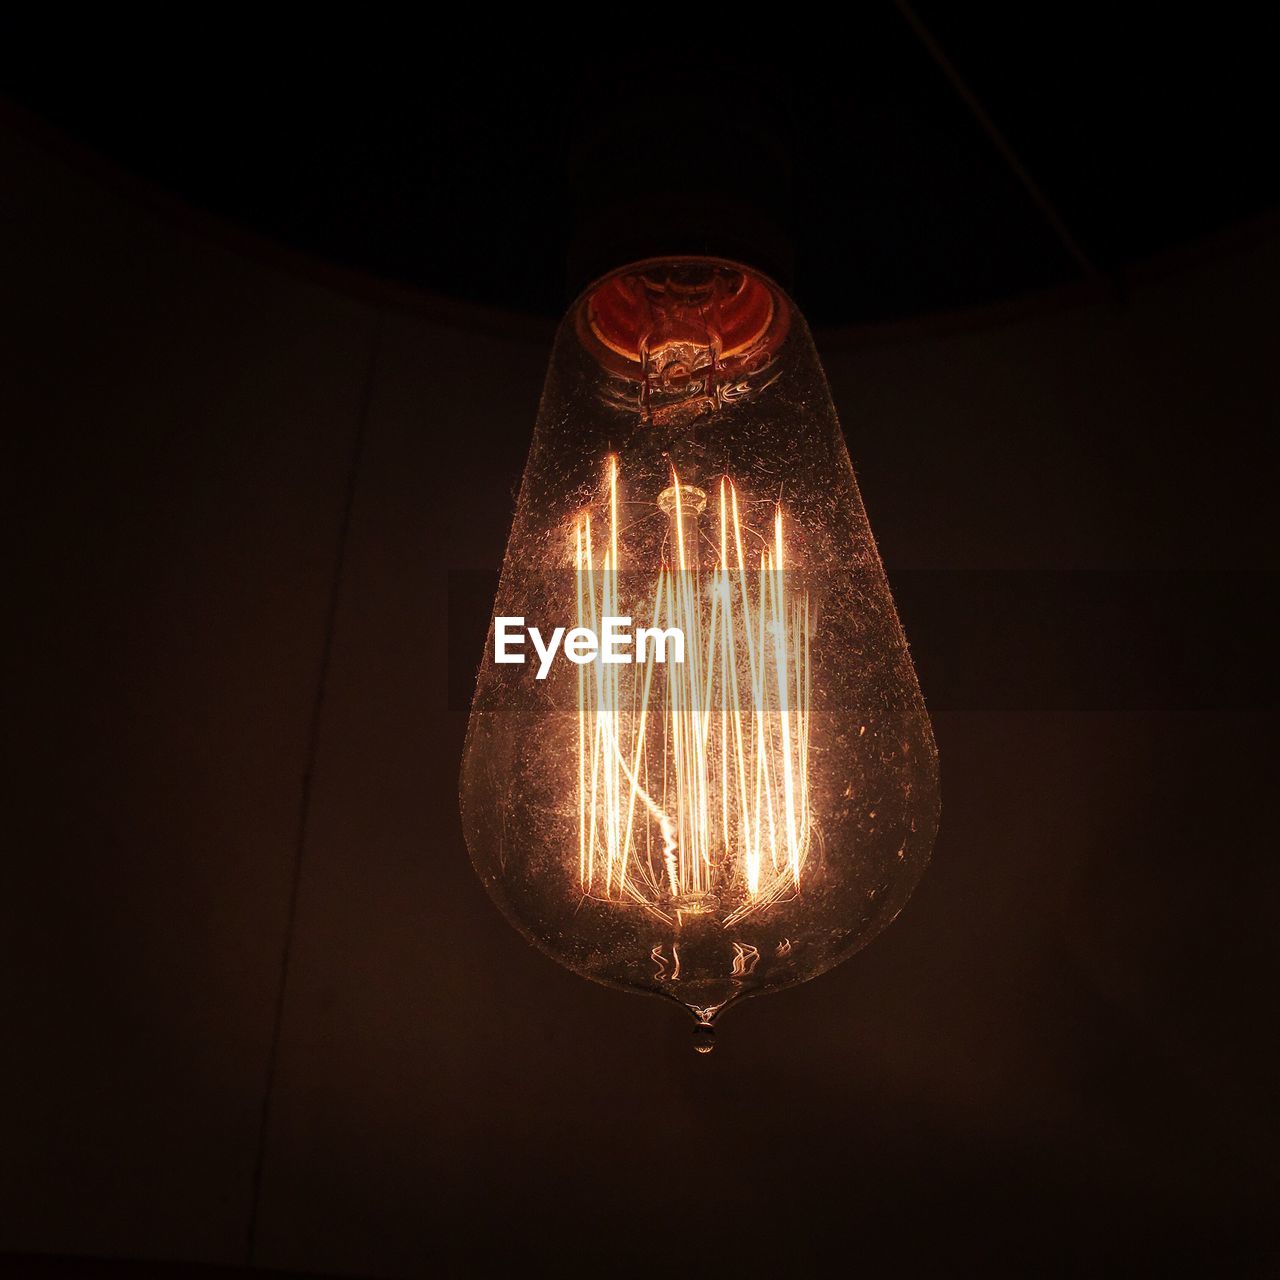 LOW ANGLE VIEW OF ILLUMINATED LIGHT BULBS HANGING AGAINST BLACK BACKGROUND